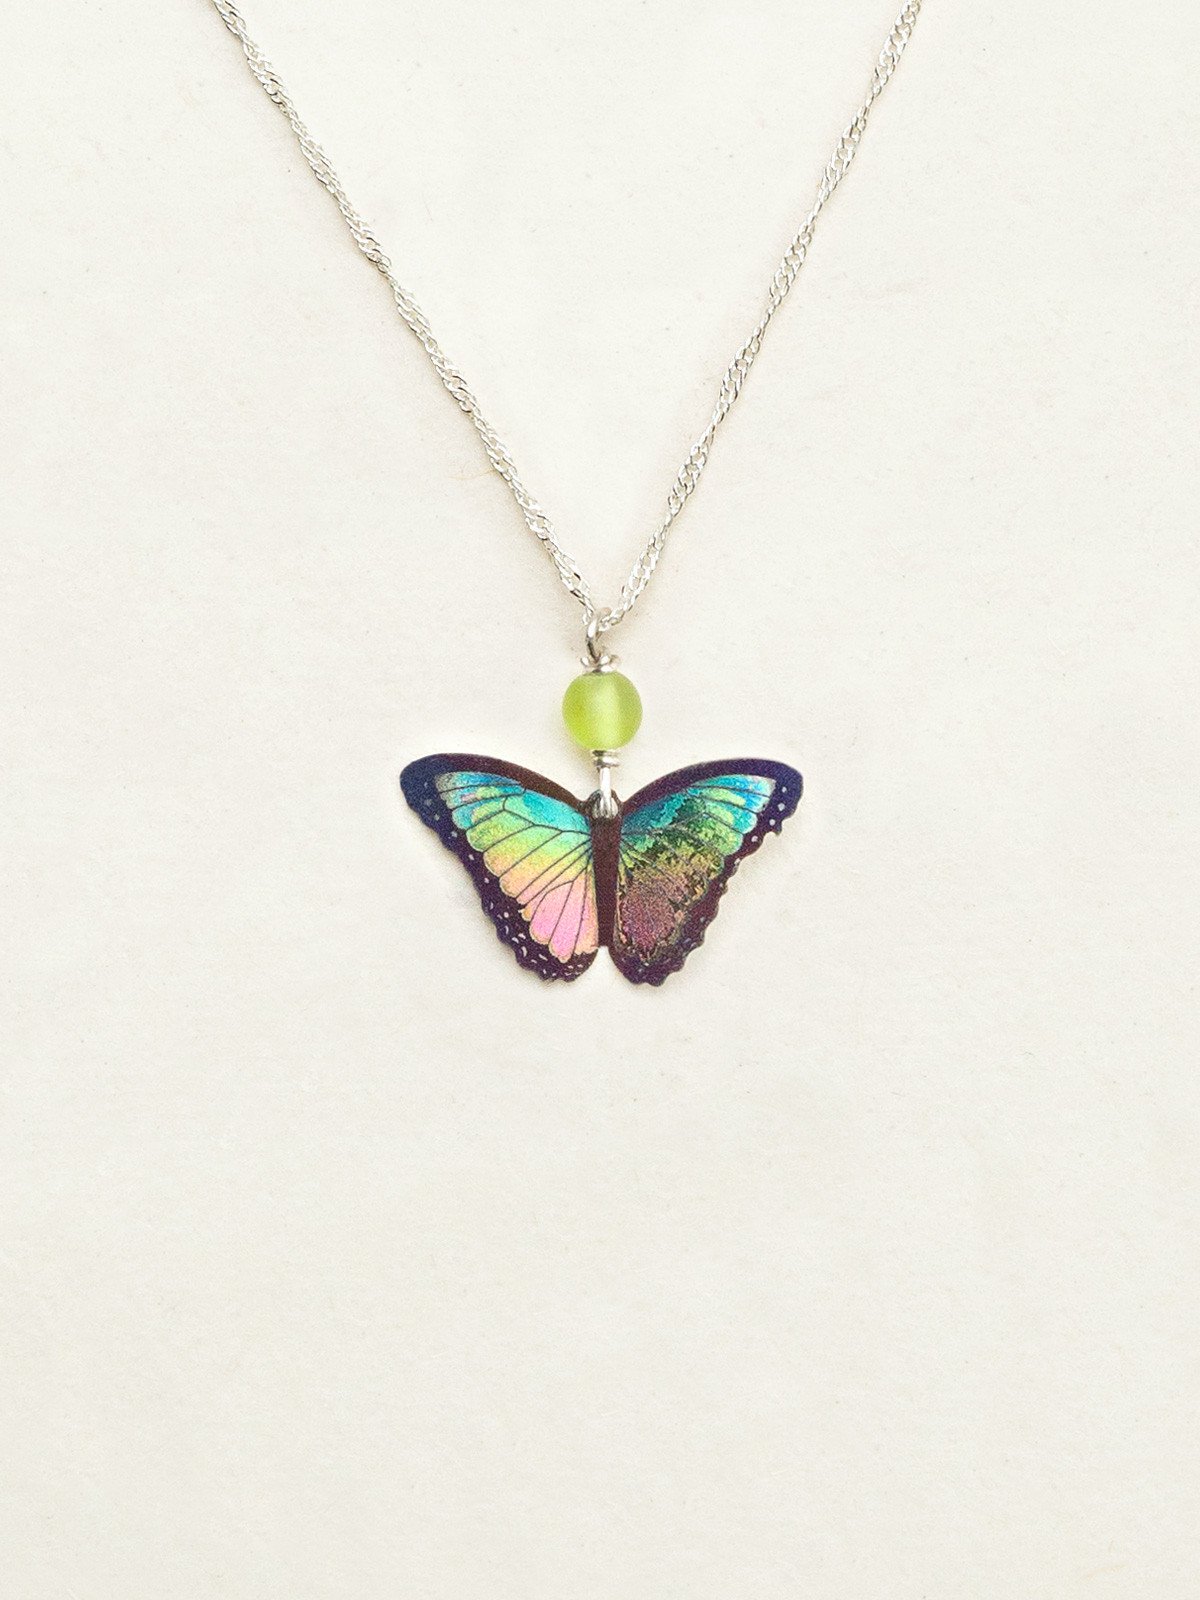 Butterfly necklace by jewelry designer Holly Yashi in Island Green